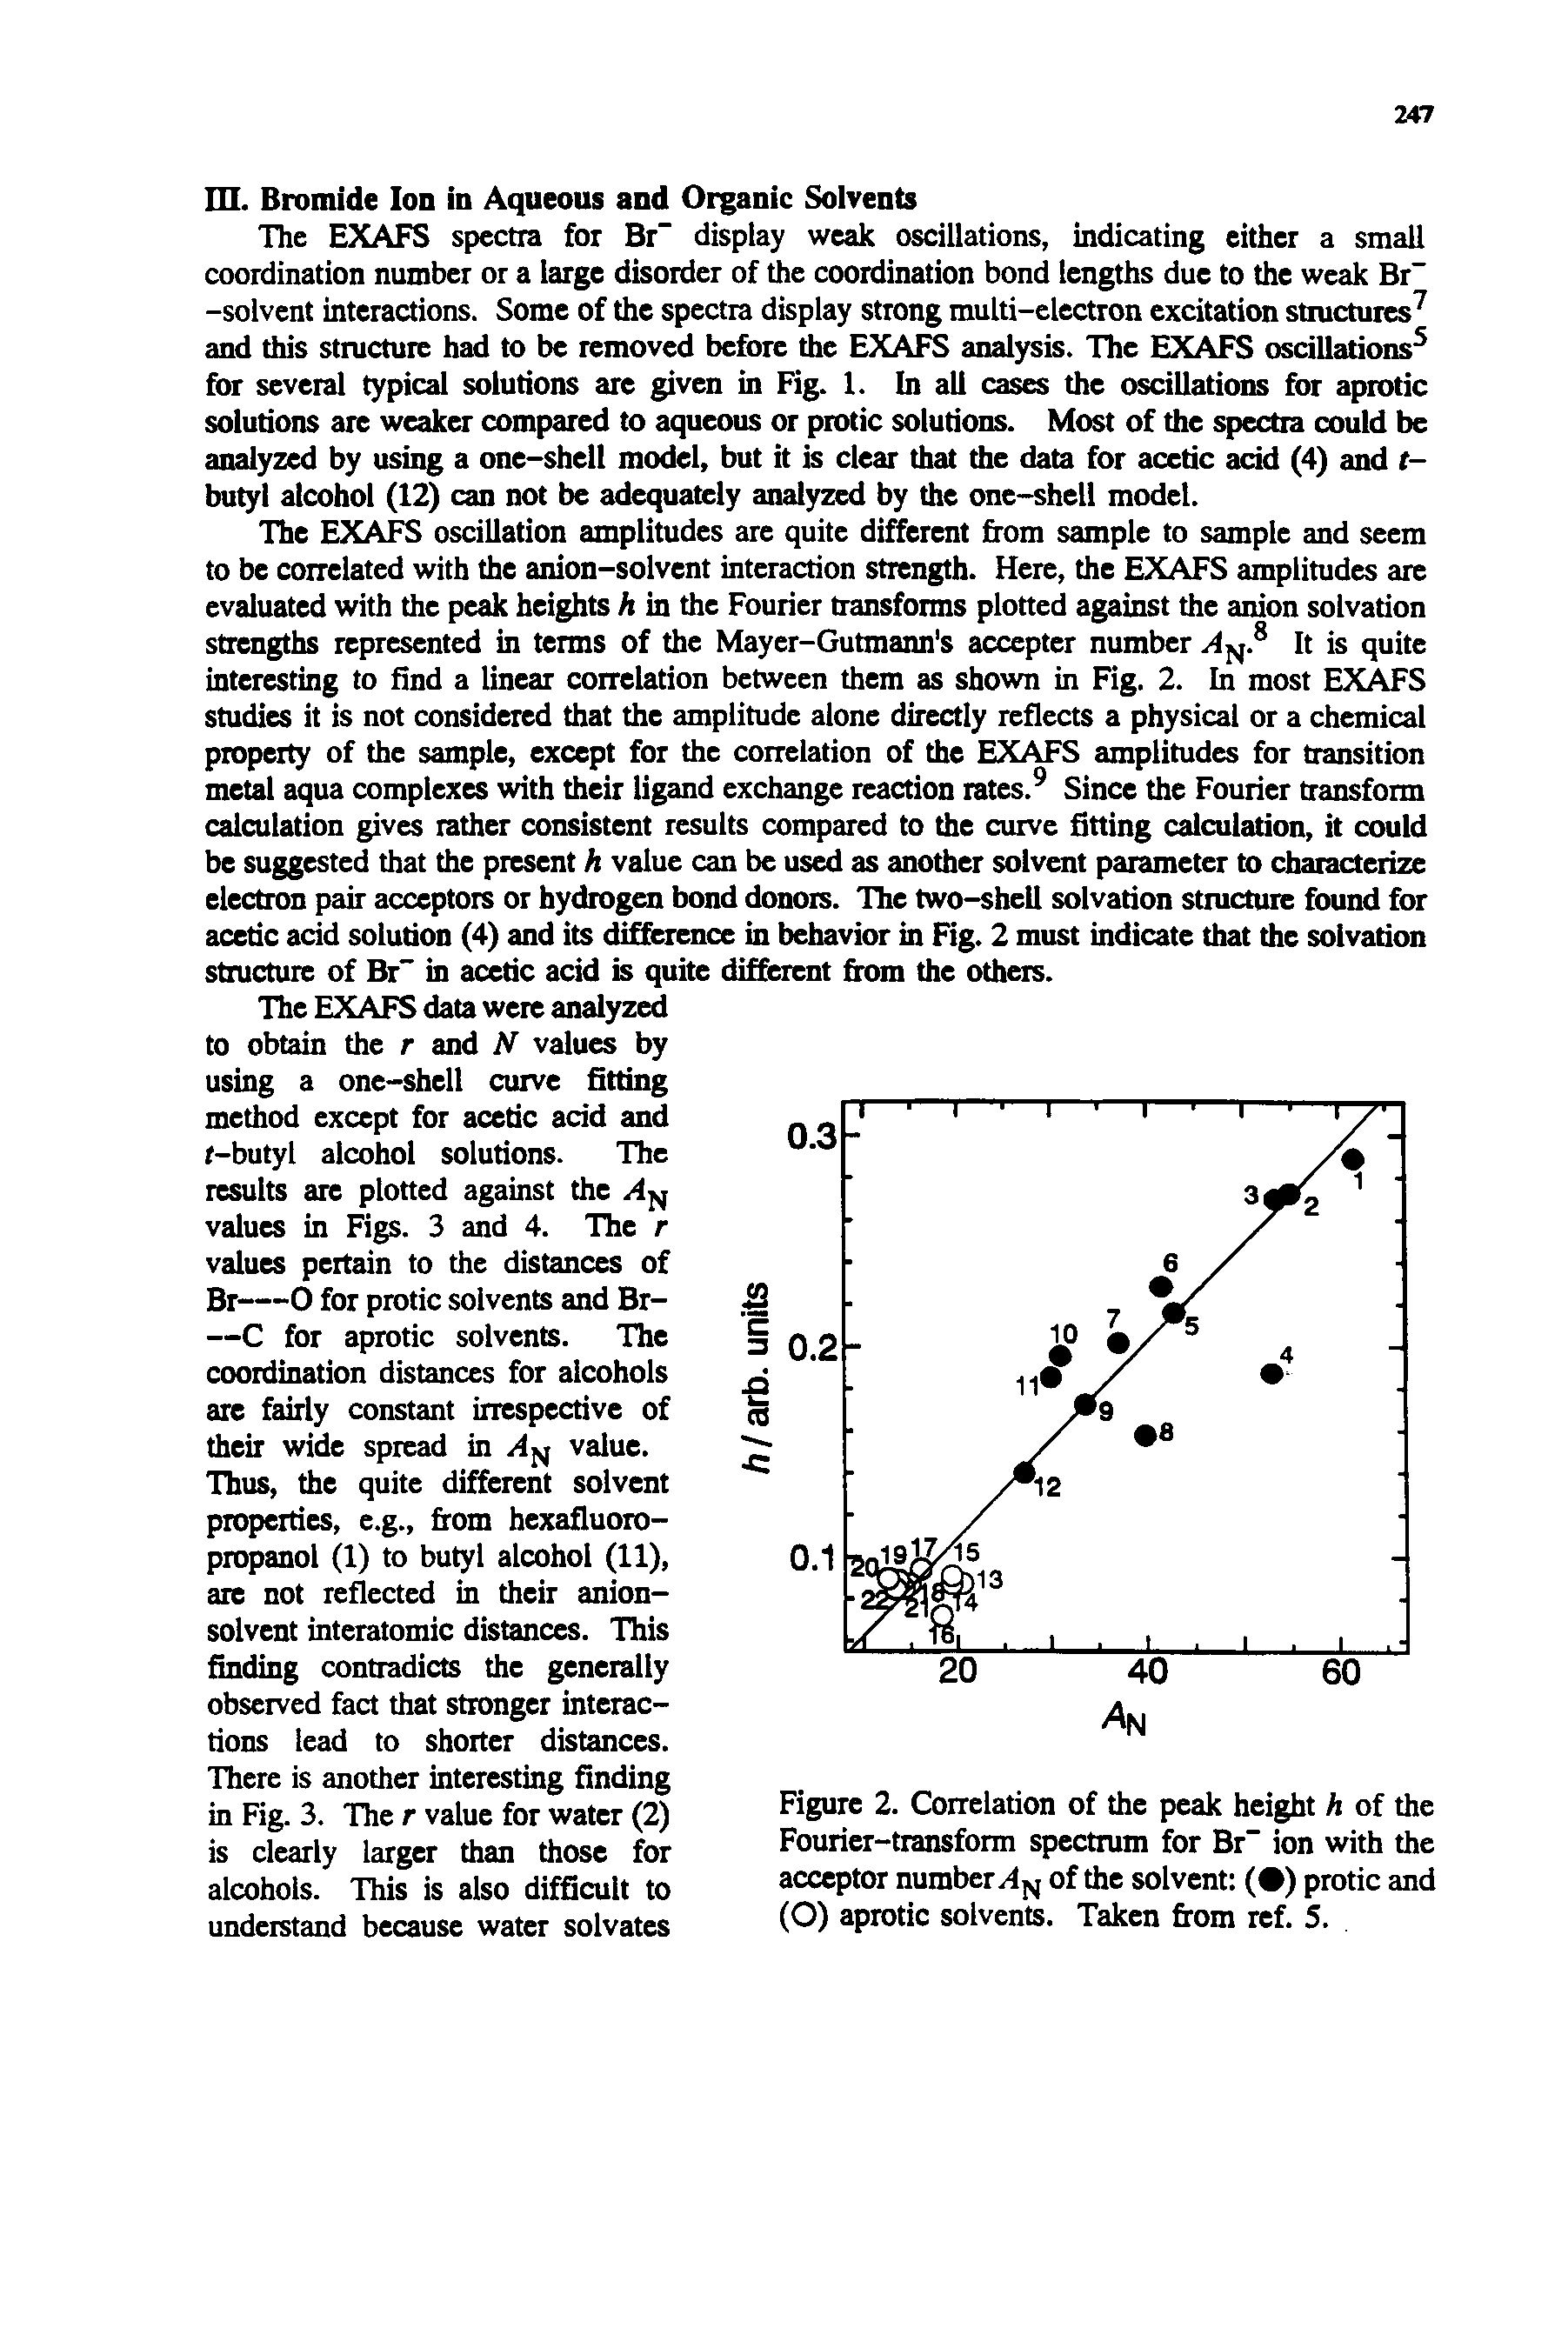 Figure 2. Correlation of the peak height h of the Fourier-ttansform spectrum for Br ion with the acceptor number/4j j of the solvent ( ) protic and (O) aprotic solvents. Taken from ref. 5.